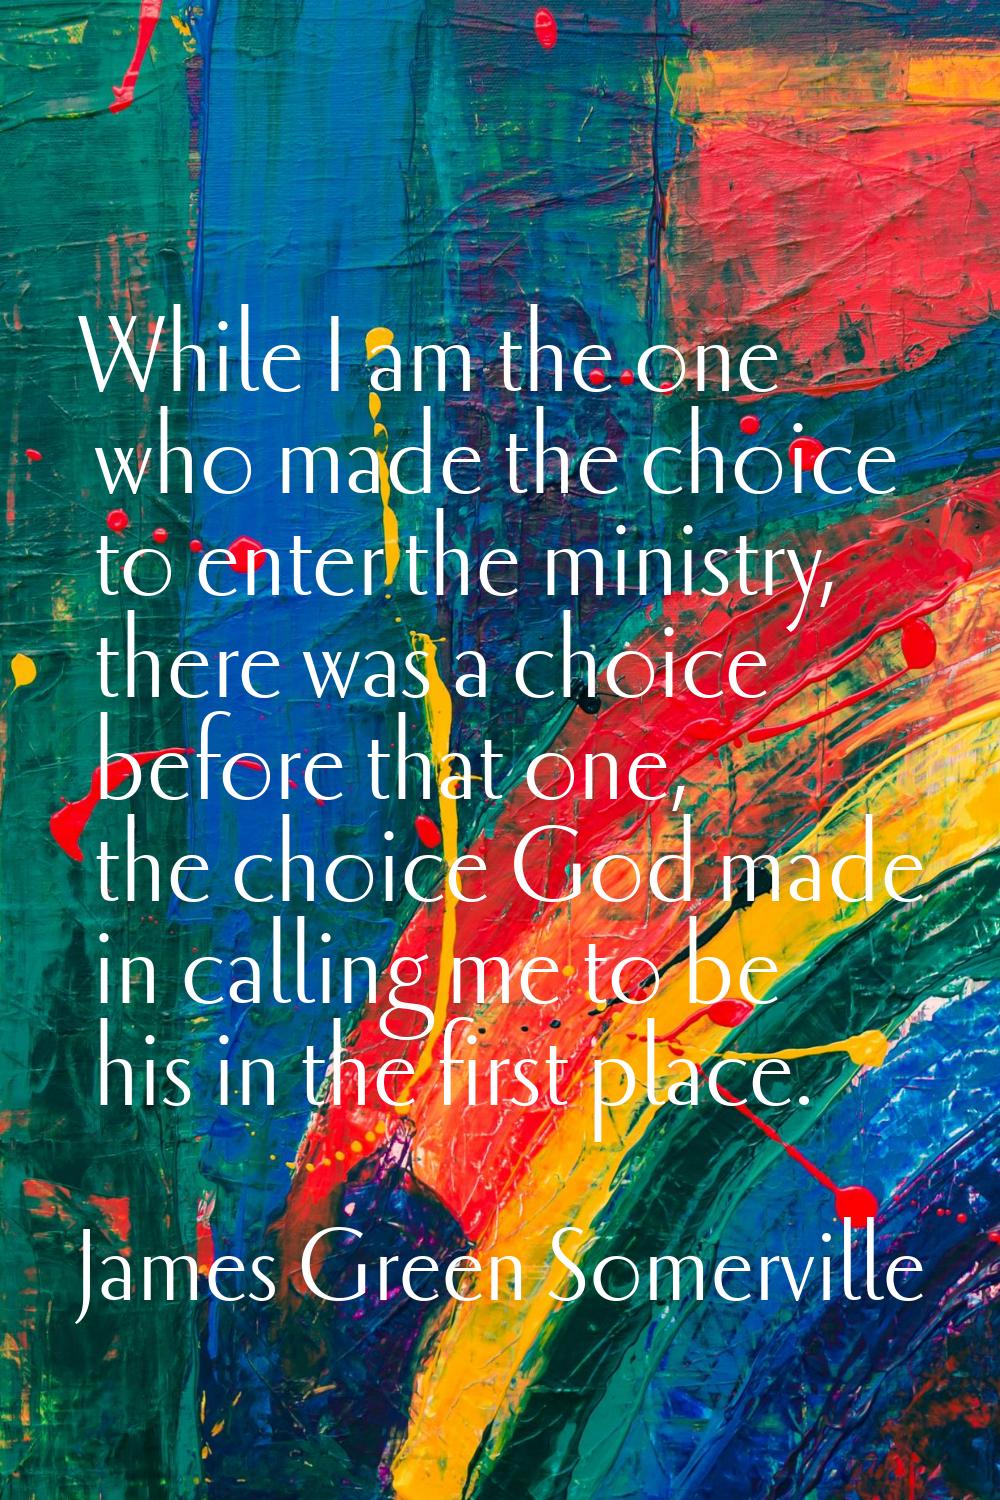 While I am the one who made the choice to enter the ministry, there was a choice before that one, t